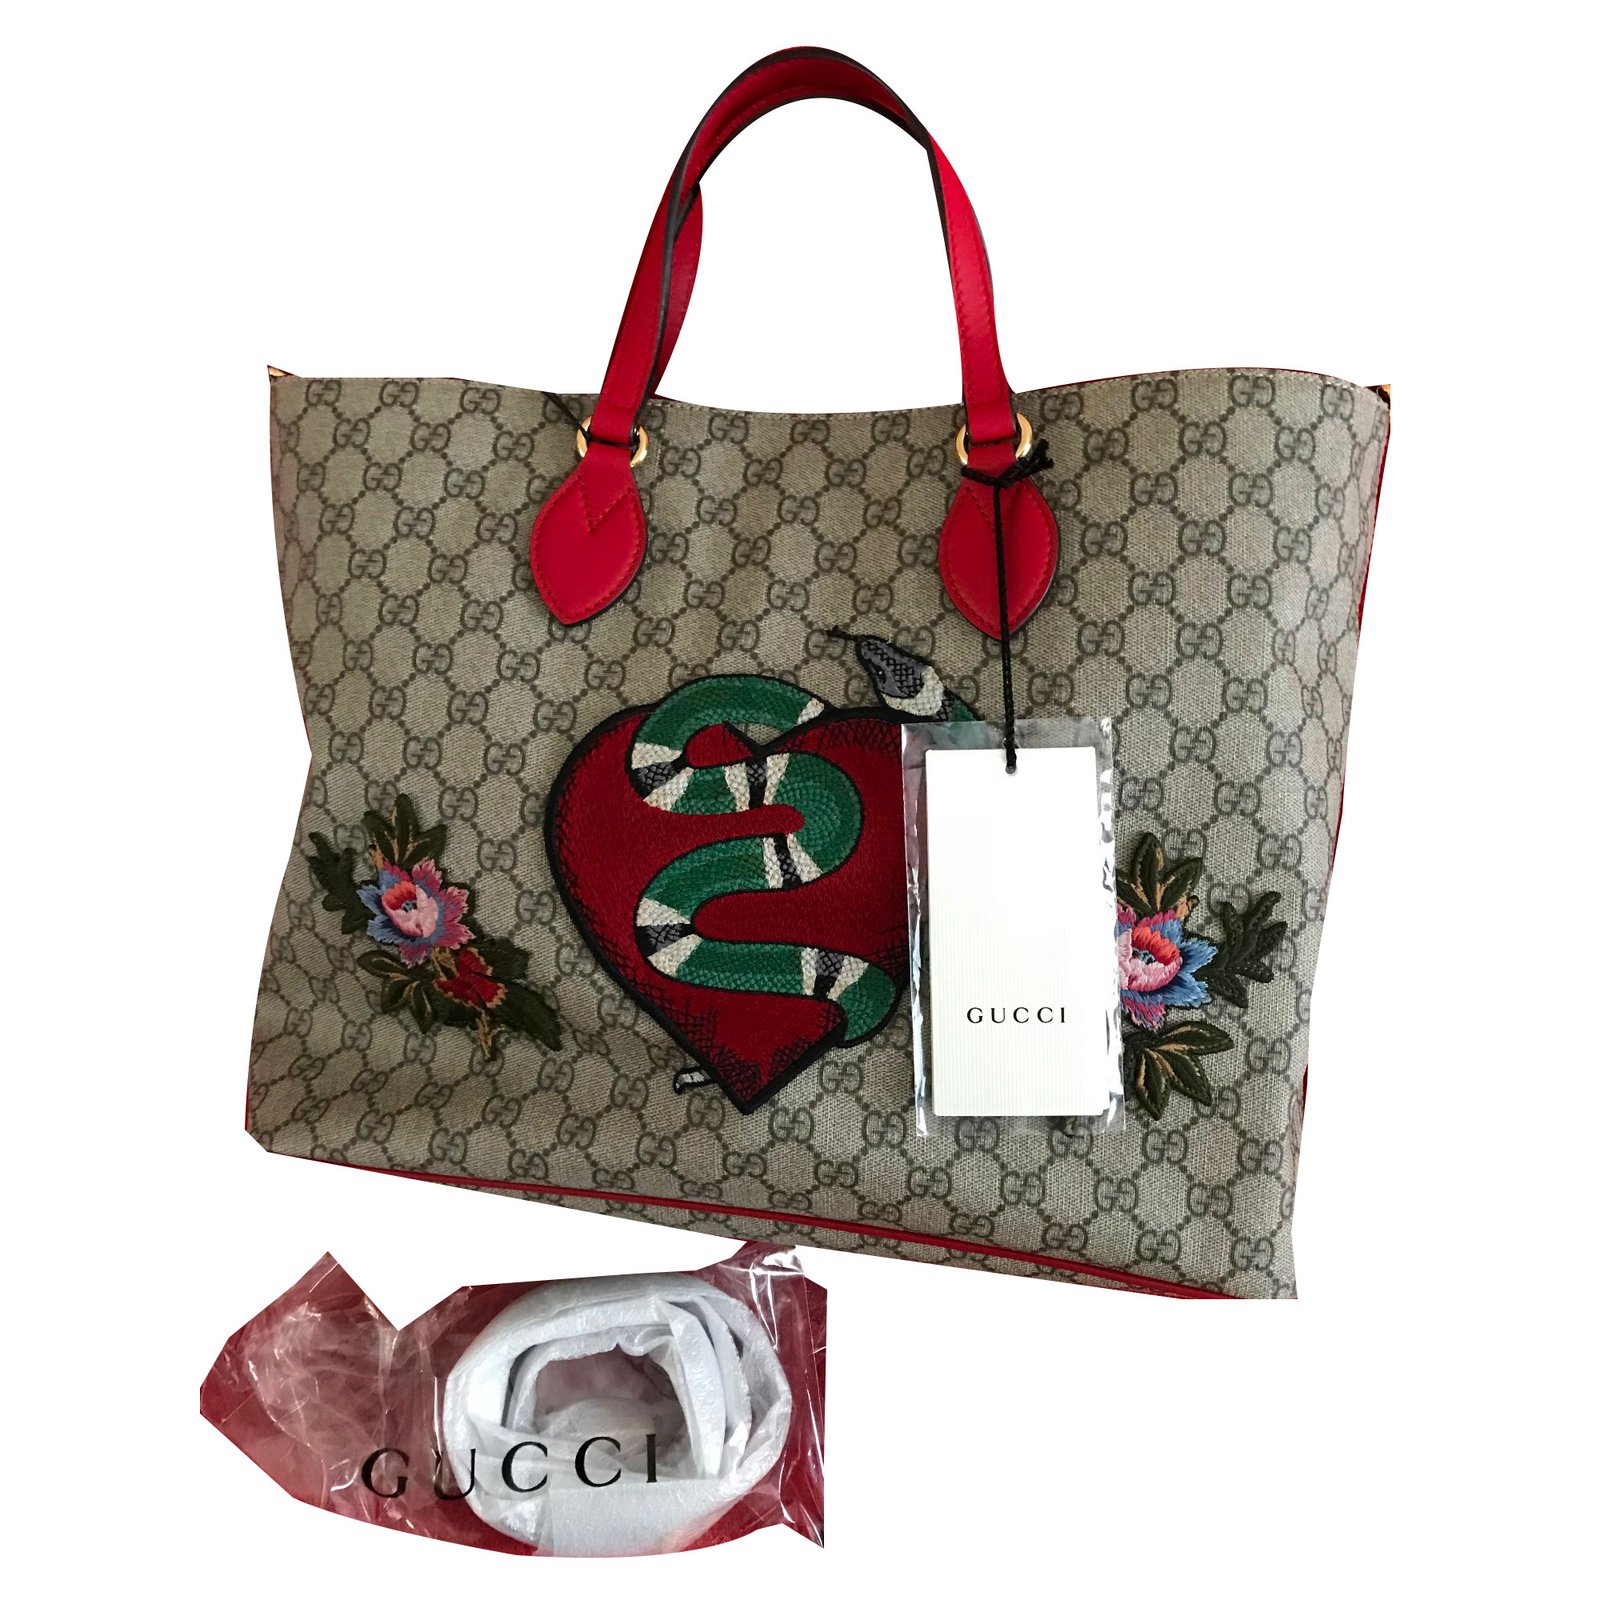 Gucci Gucci Limited Edition Soft GG Supreme Tote Bag - Brand New with tags! Handbags Cloth Beige ...